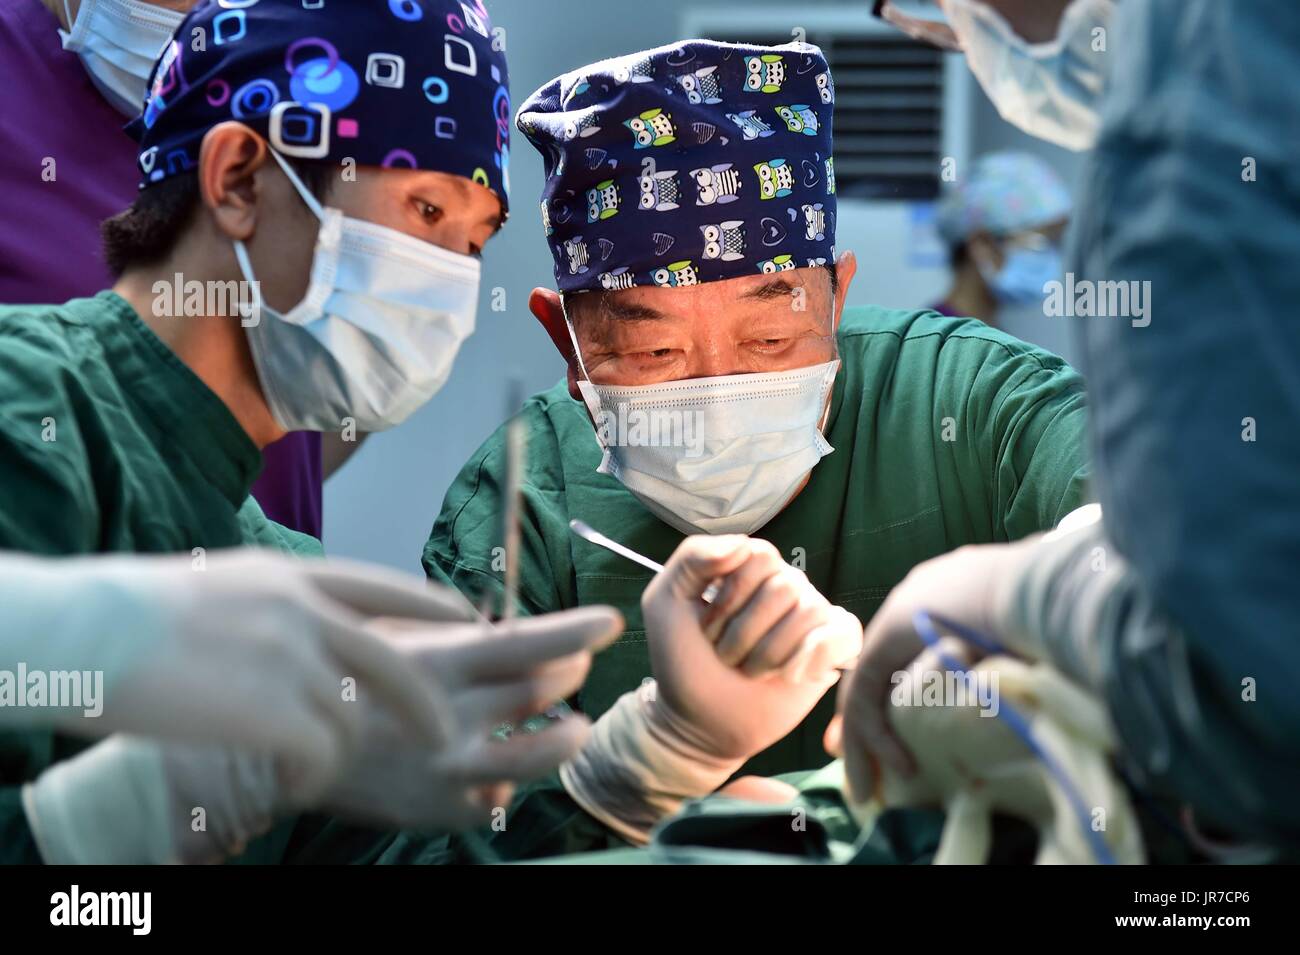 (170804) -- JINAN, Aug. 4, 2017 (Xinhua) -- Qi Qingliang (right), President of Yuanquan Central Health Center of Boshan District does an operation in Zibo, east China's Shandong Province, Aug. 3, 2017. 65-year-old Qi Qingliang, the representative of the 19th National Congress of the Communist Party of China(CPC), has worked hard every day to help the patients. When he graduated from university in 1978, he had the chance to stay at the school but he refused it and returned to Boshan District Hospital which located in the mountain area of his hometown. In 1997, as one of the top 10 famous doctor Stock Photo